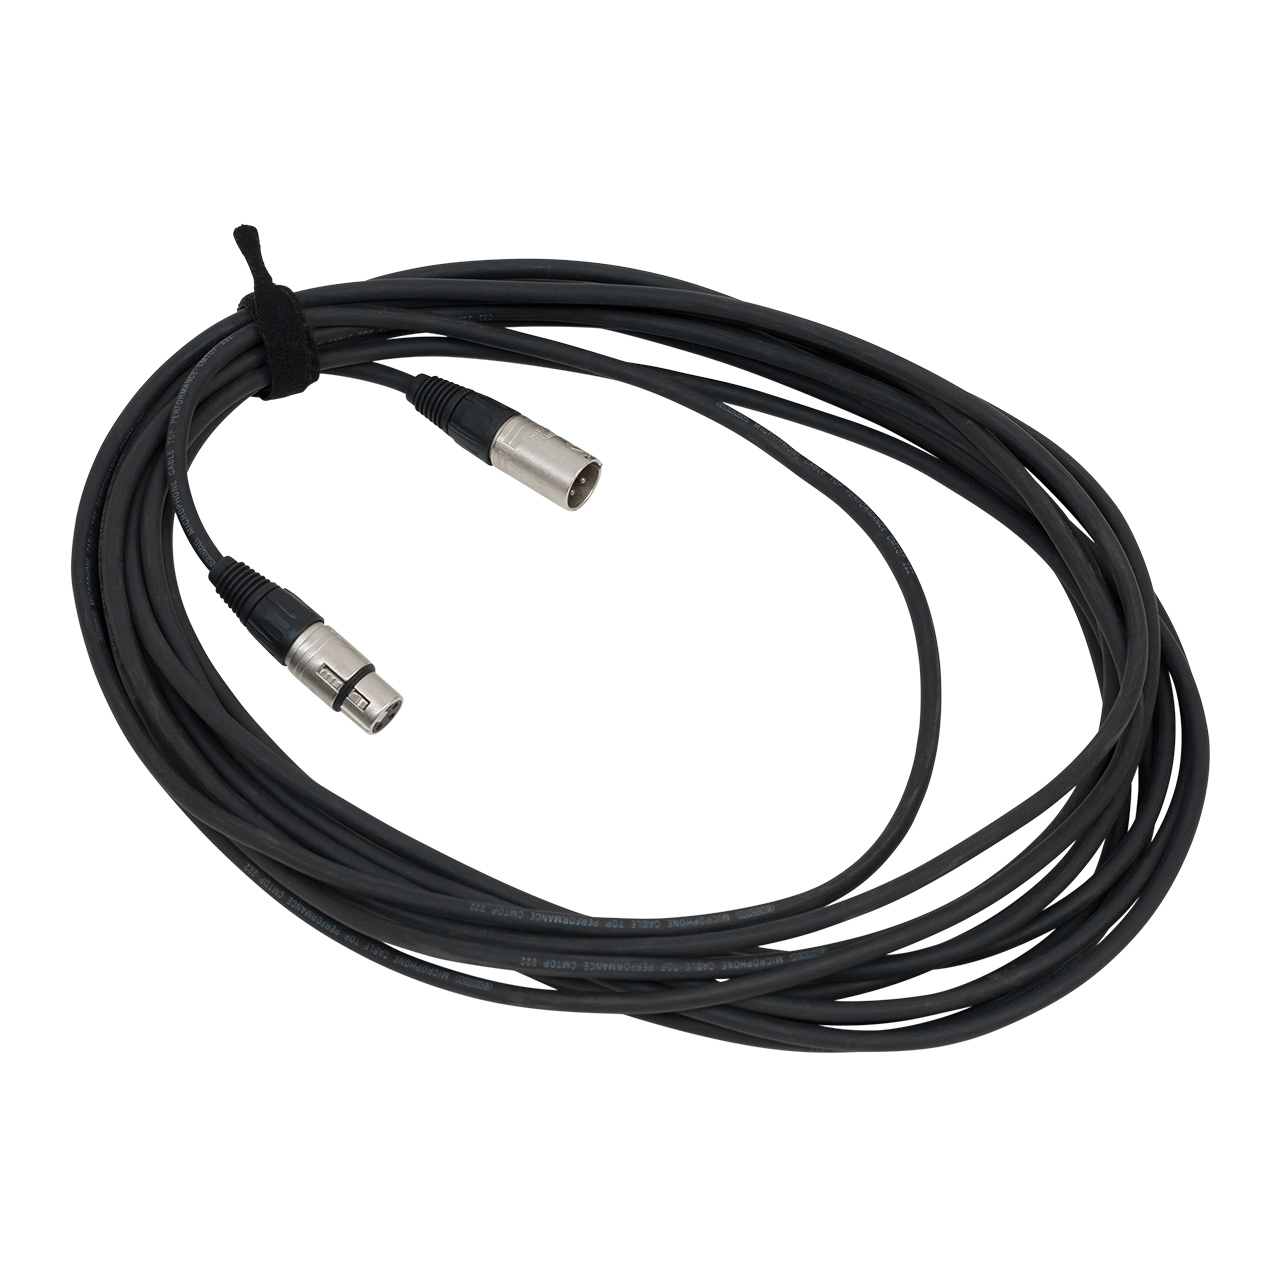 Master/Slave cable, 2.5m